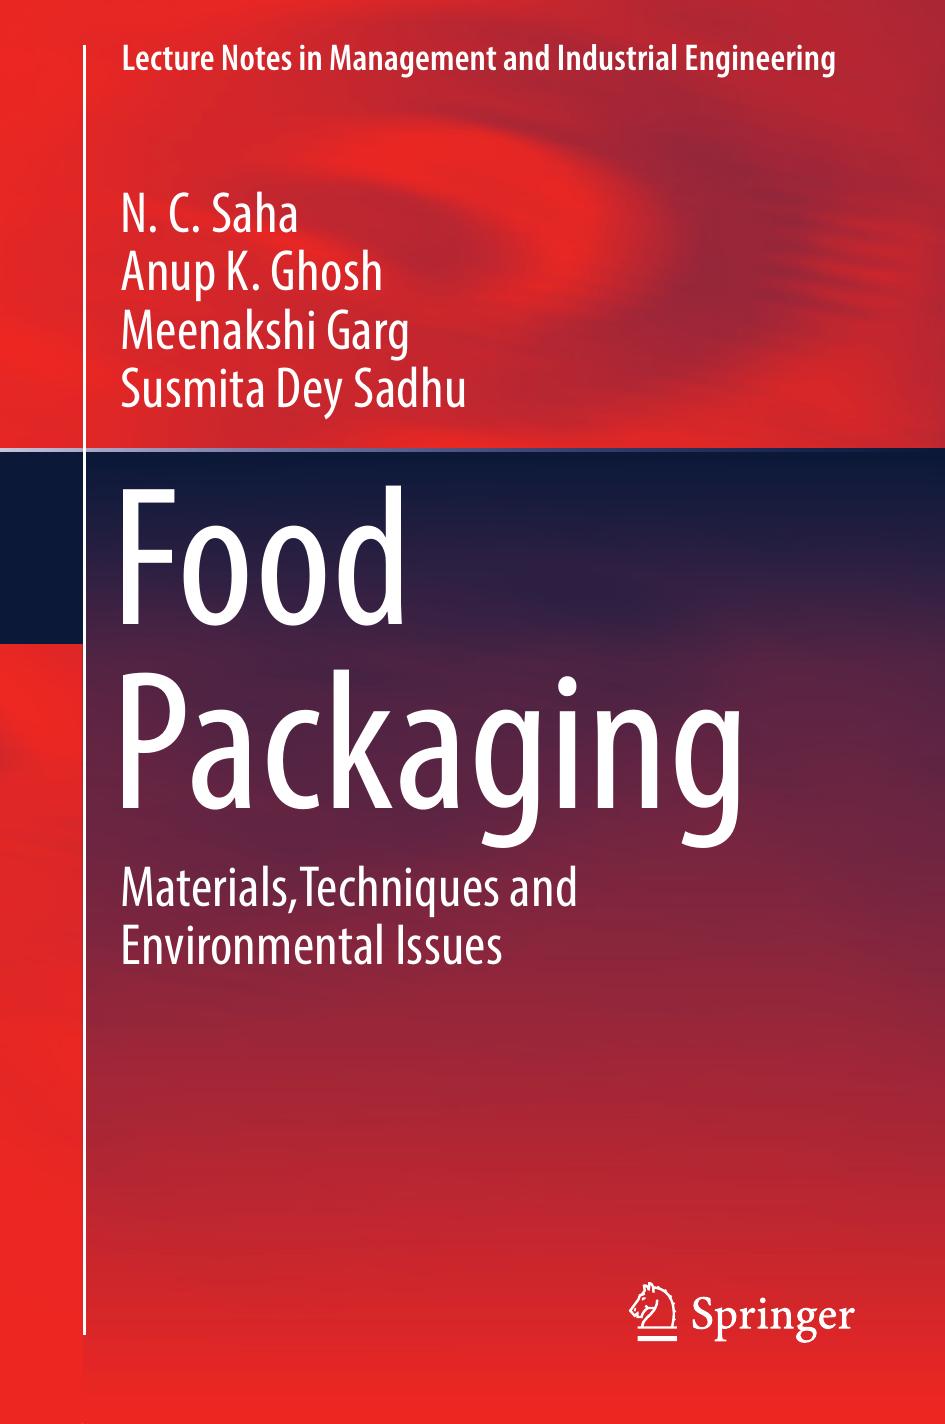 Food Packaging  Materials,Techniques and Environmental Issues (Lecture Notes in Management and Industrial Engineering)-Springer (2022)